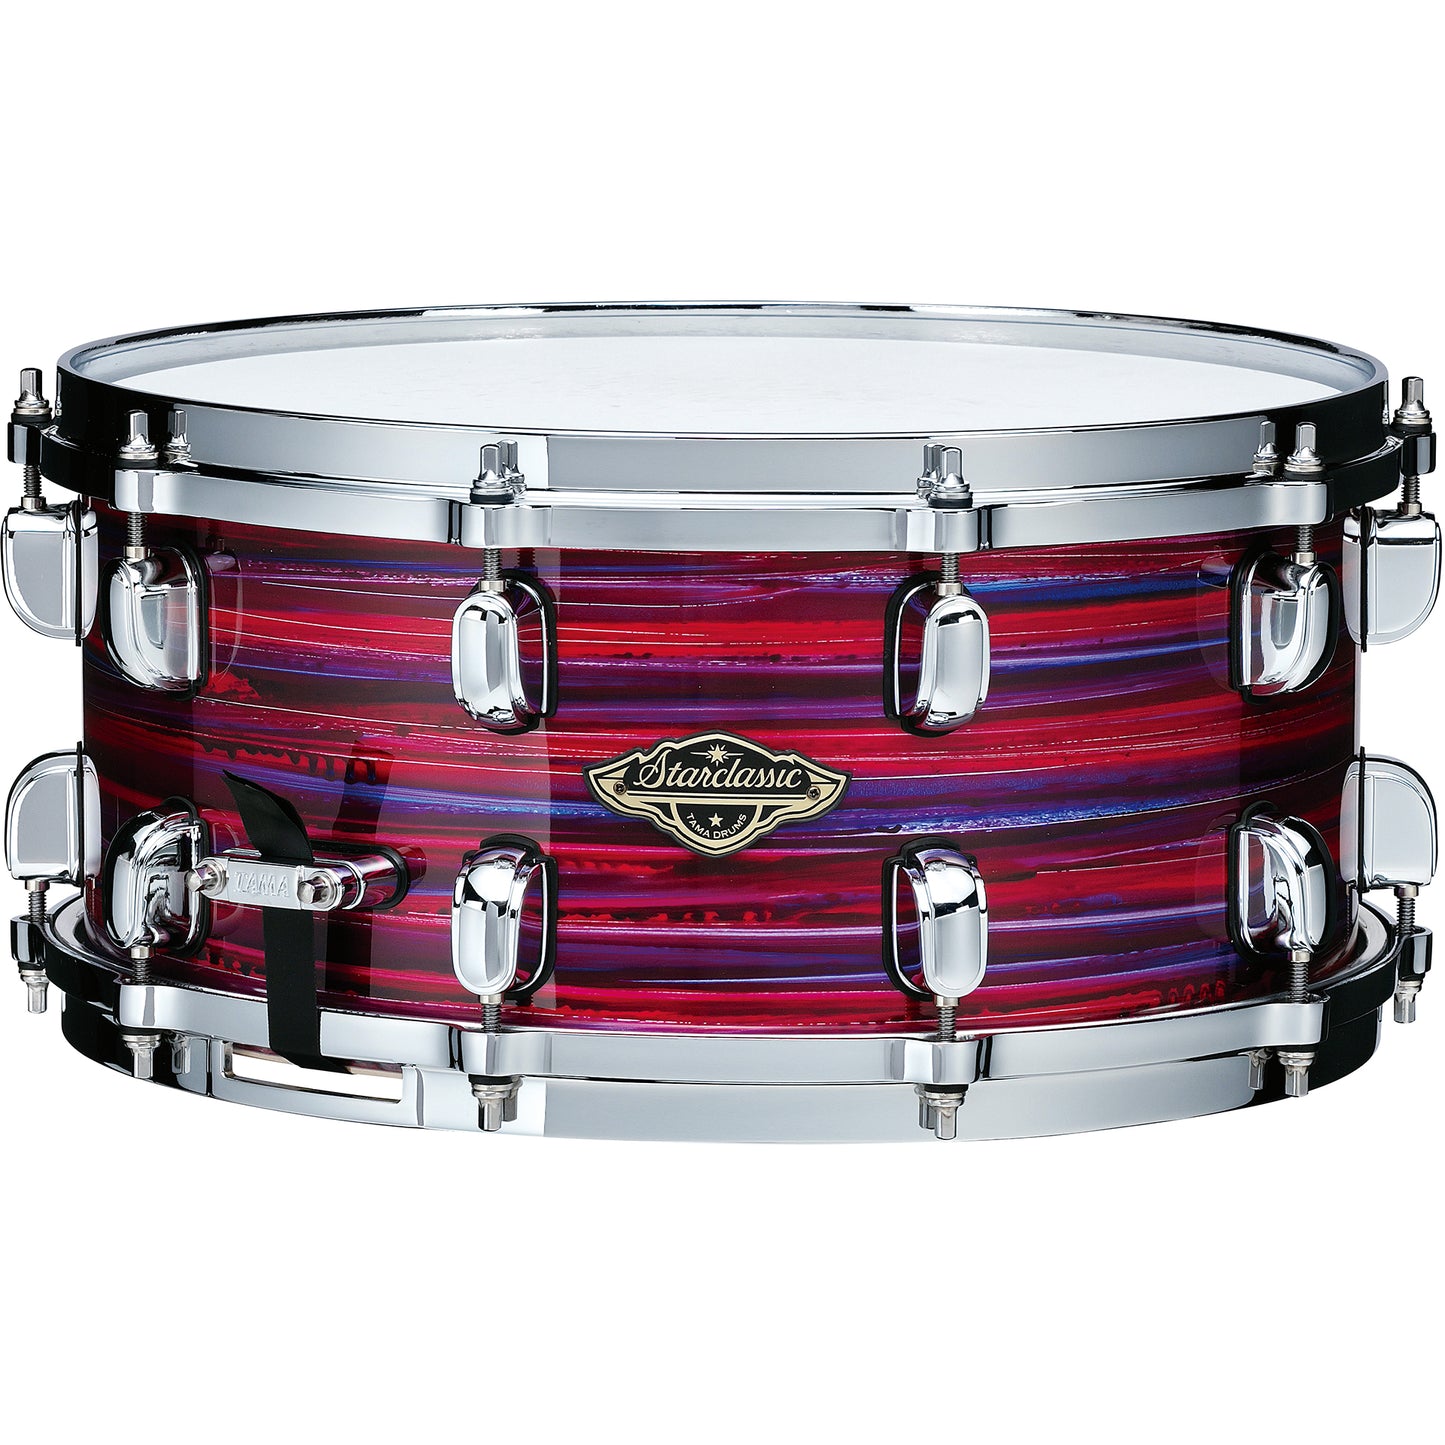 TAMA Starclassic WBSS65LPO 6.5x14 Snare Drum in Lacquer Phantasm Oyster